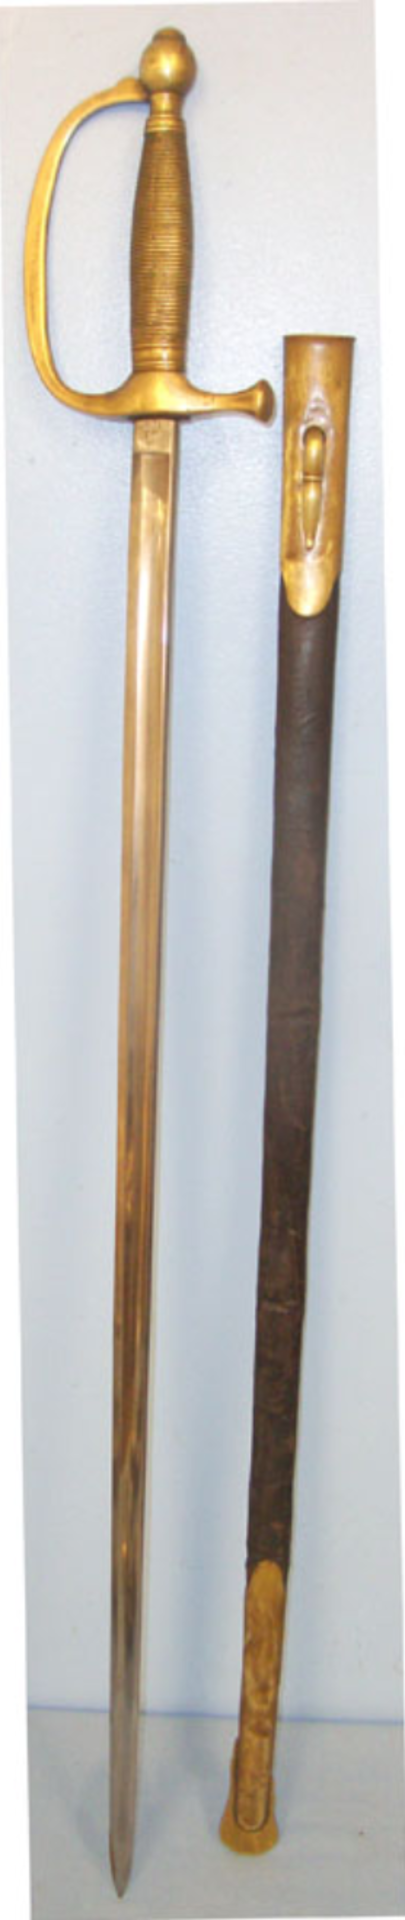 American Civil War 1864 Dated U.S. Army Model 1840 Bandsman's Sword By Ames Manufacturing Company